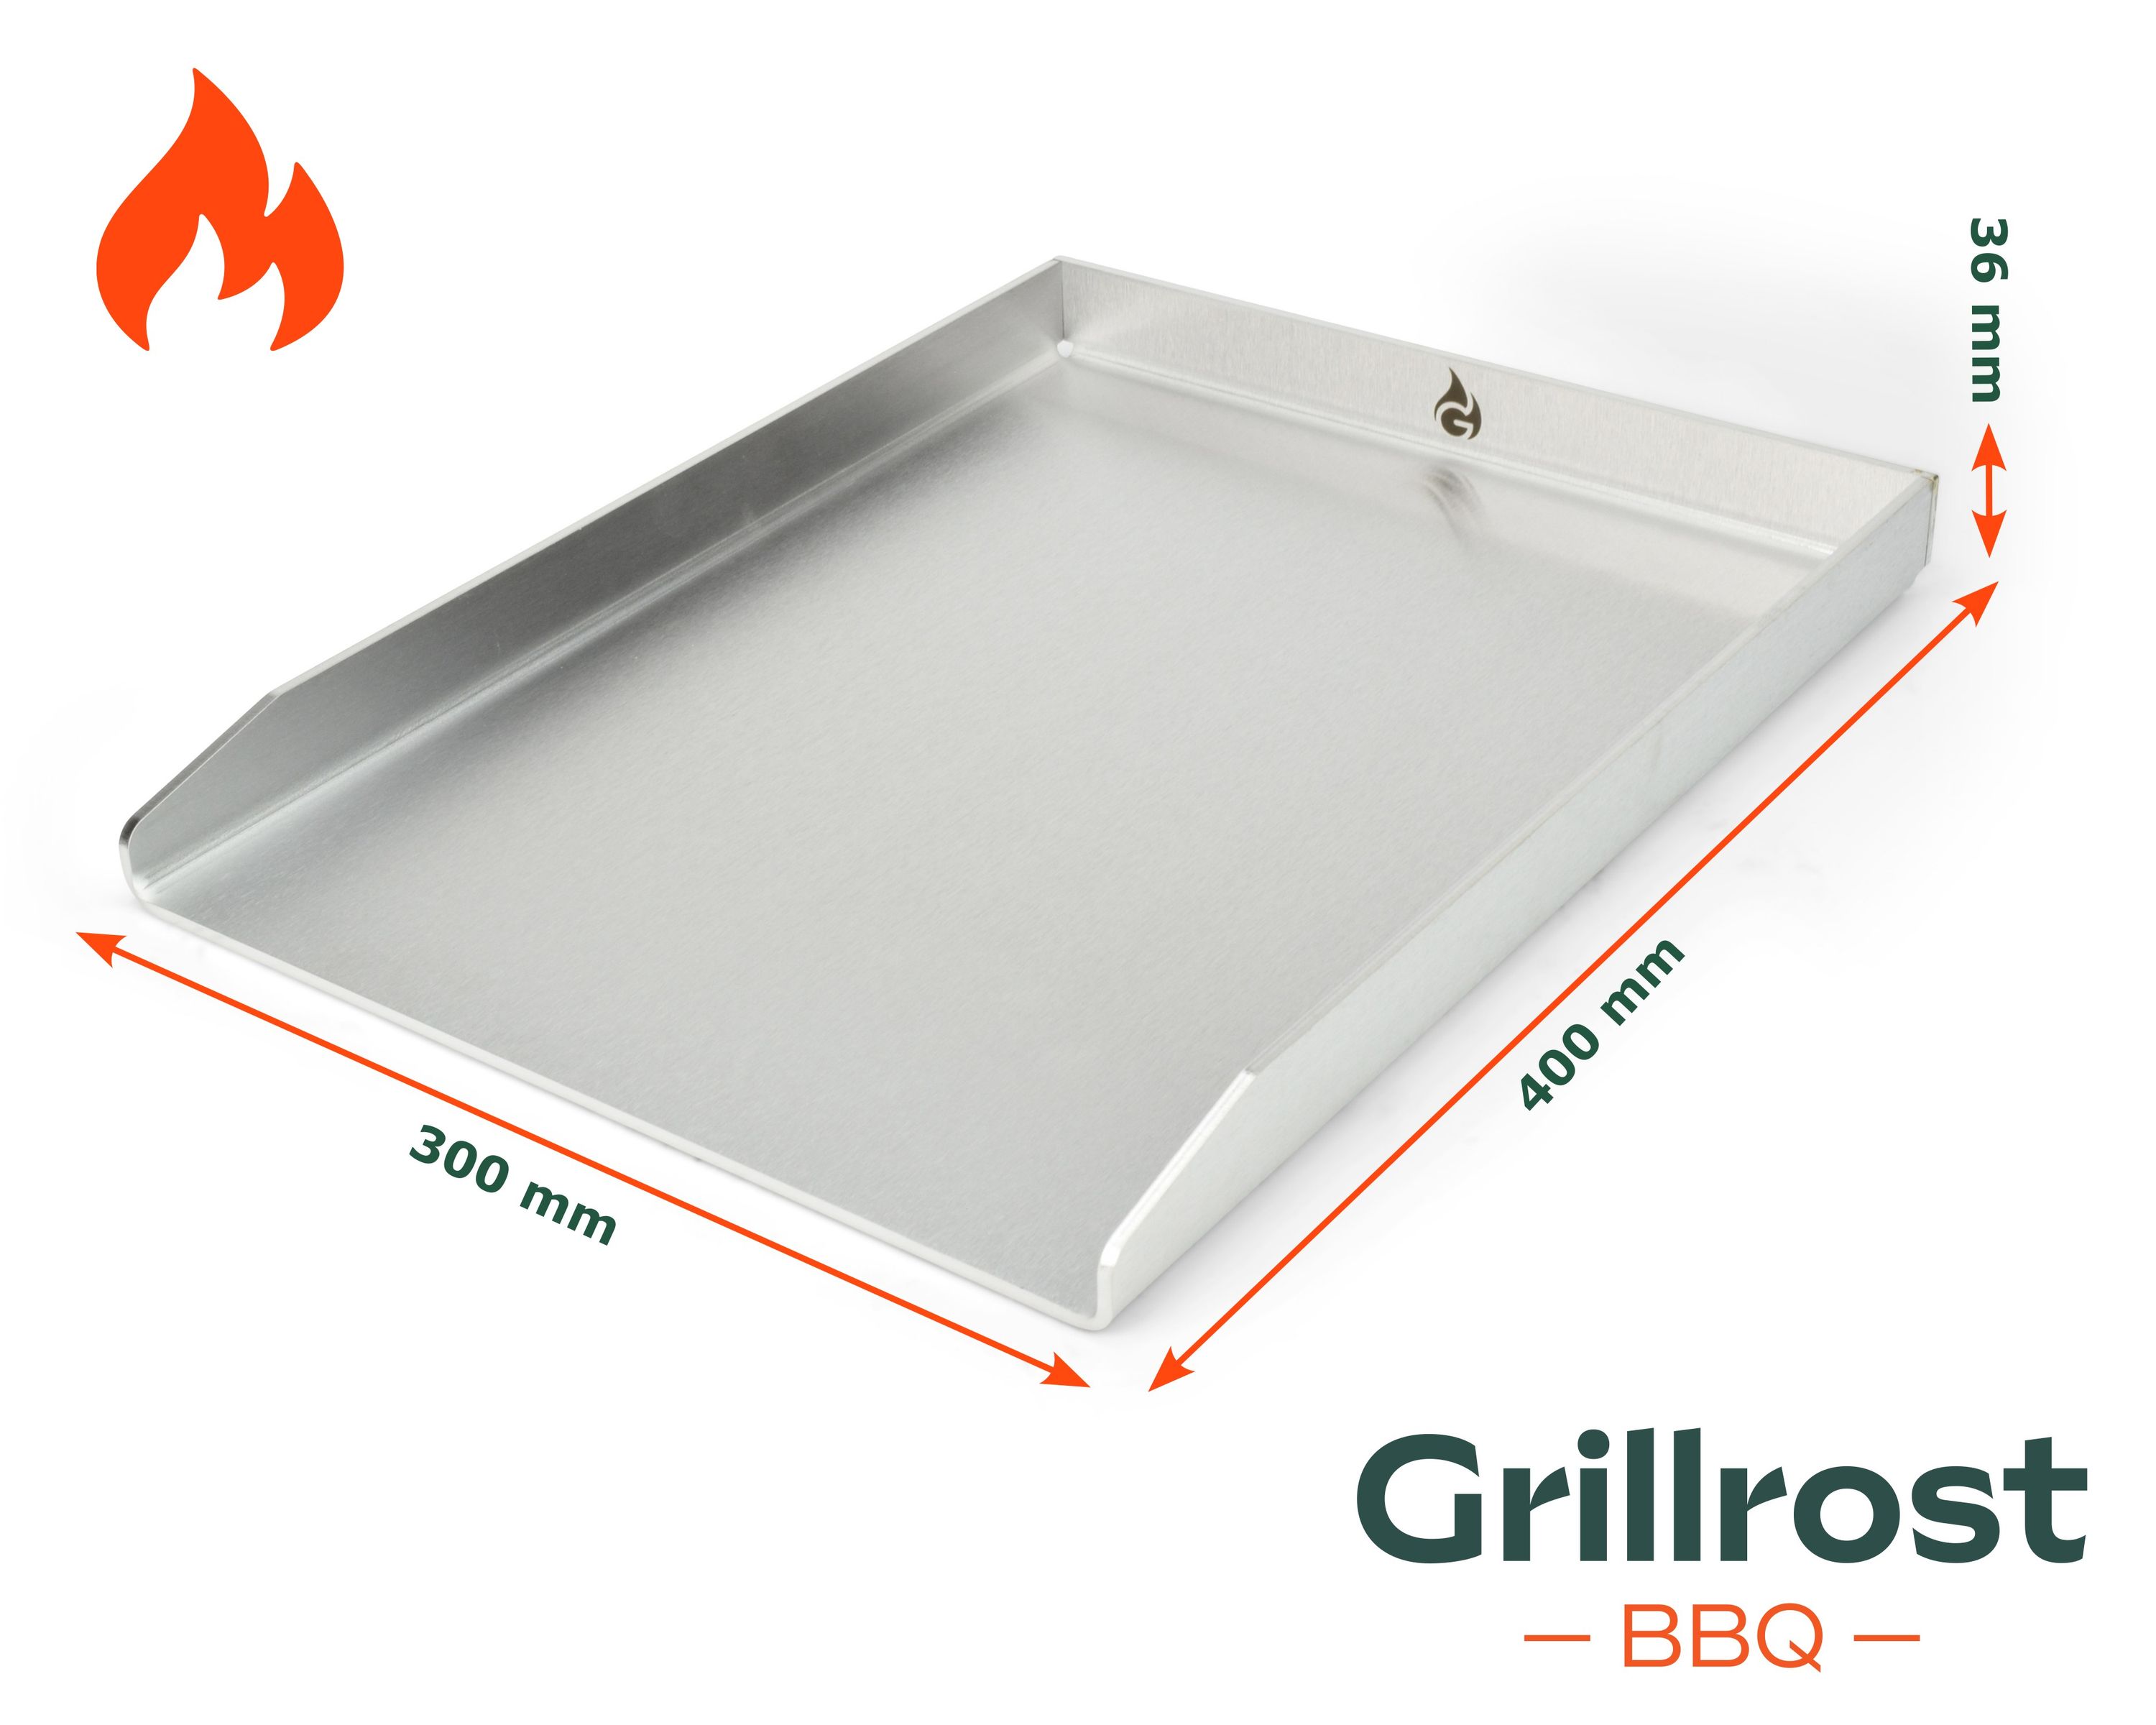 Stainless Steel Grill Plate - Plancha 30 x 40cm the universal size fits many grills